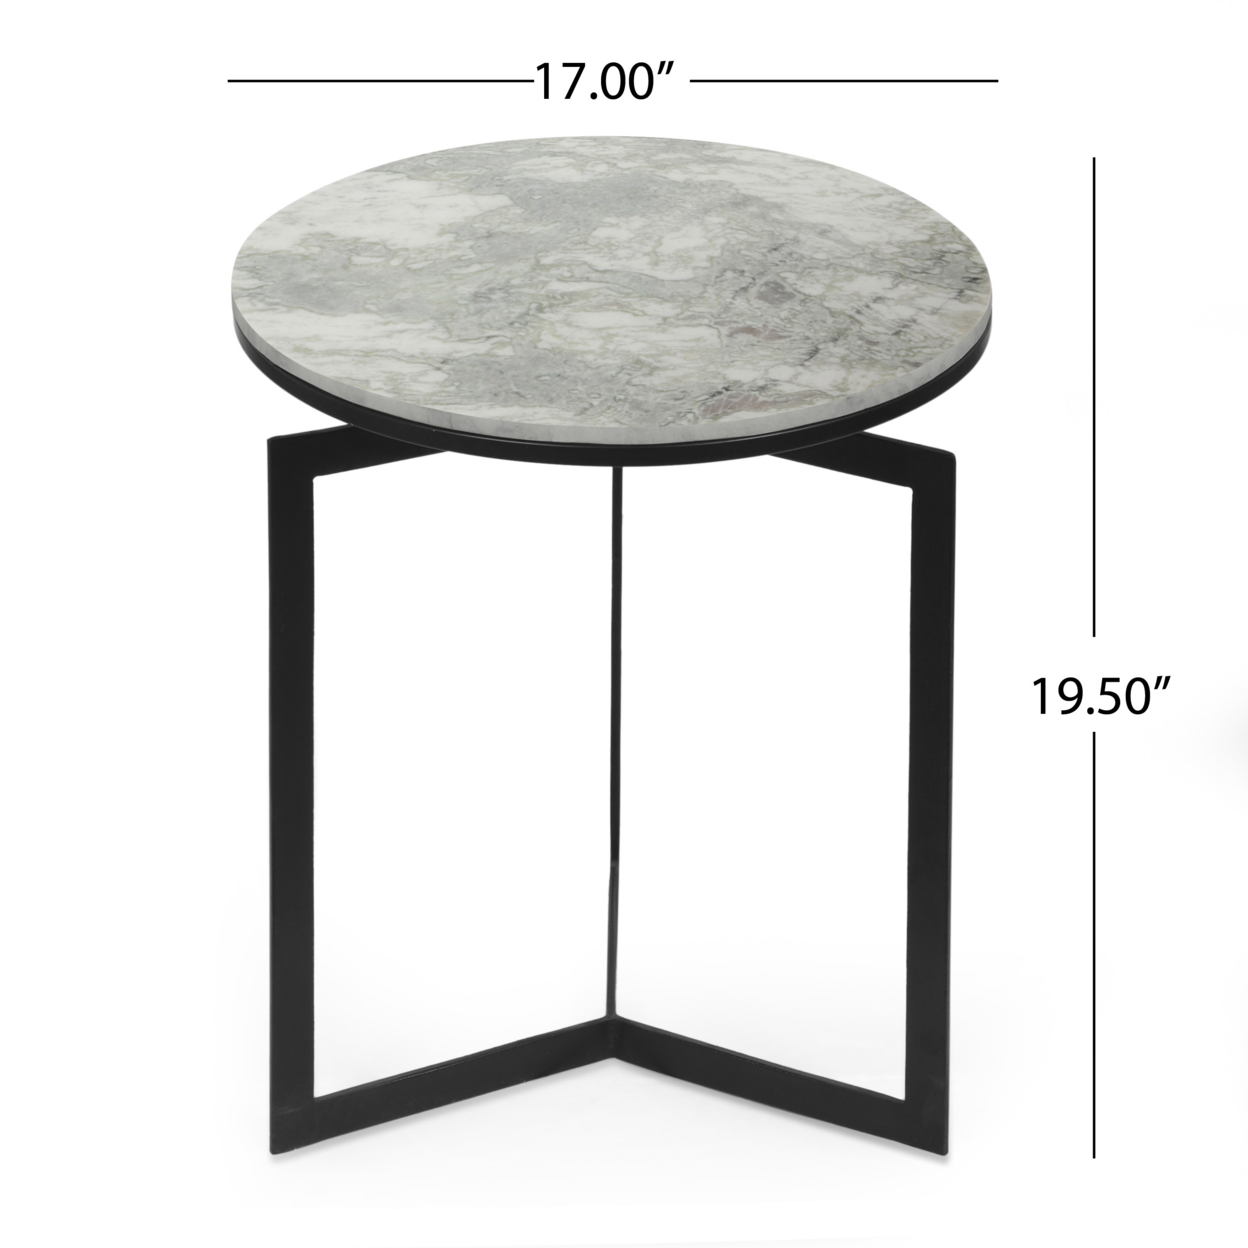 Pertica Modern Glam Handcrafted Marble Top Side Table, Natural White And Black